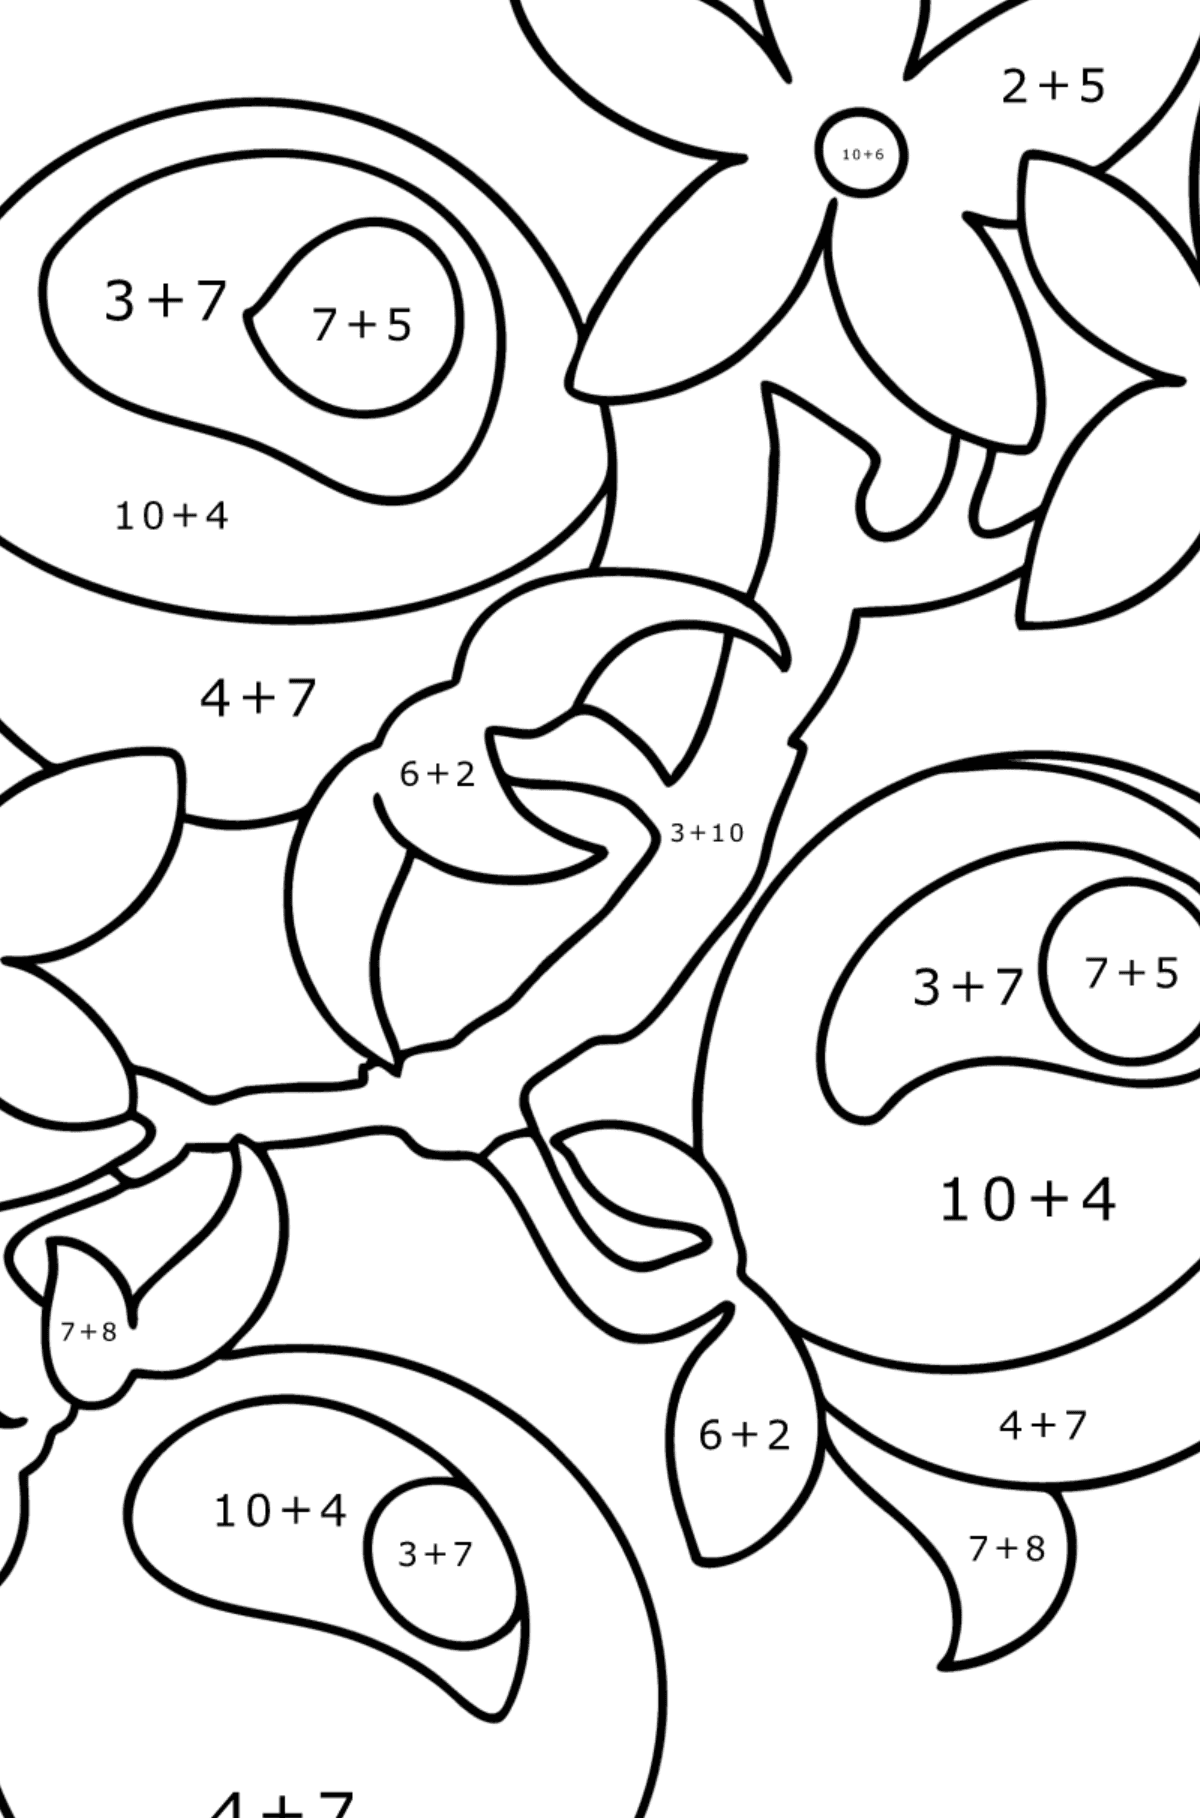 Tomatoes on the Branch сoloring page - Math Coloring - Addition for Kids